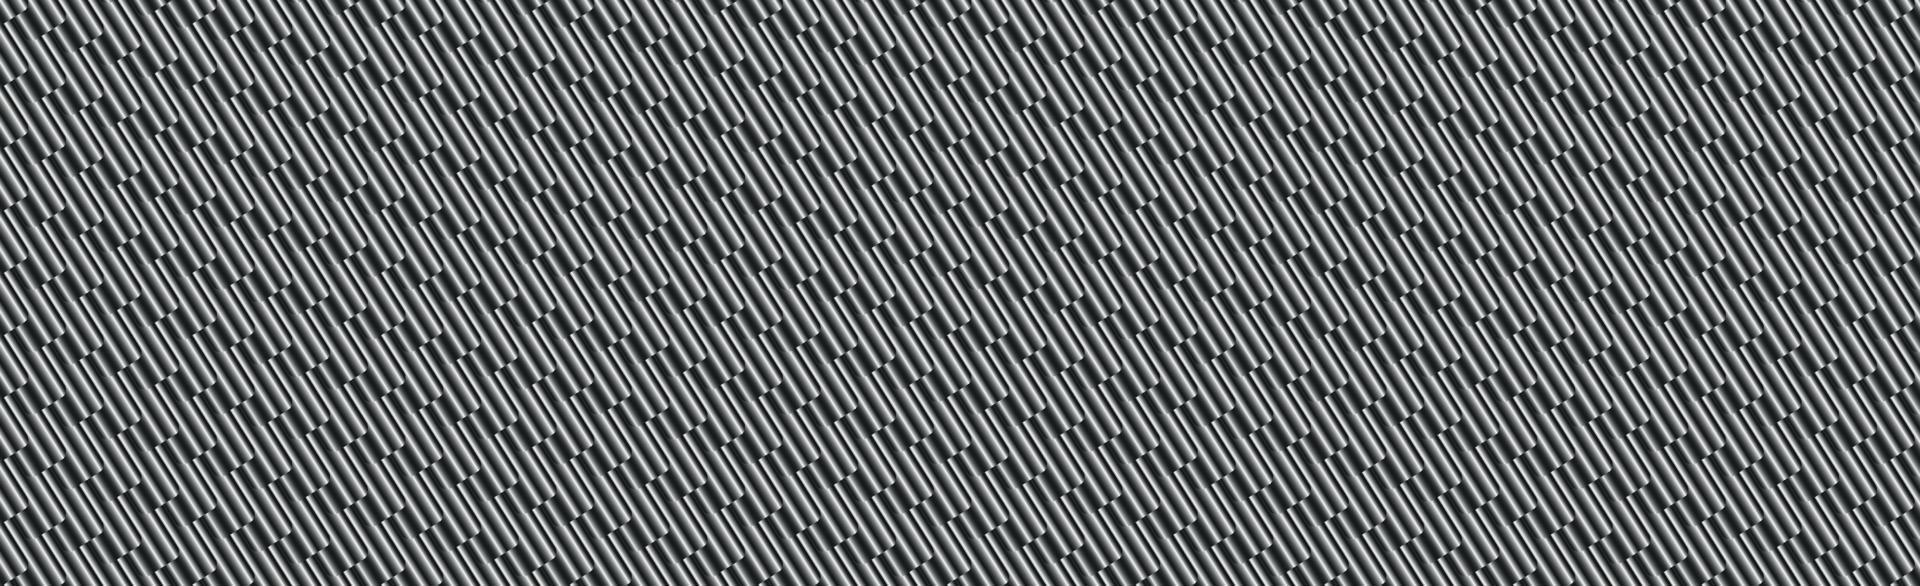 Panoramic texture of black and gray carbon fiber vector